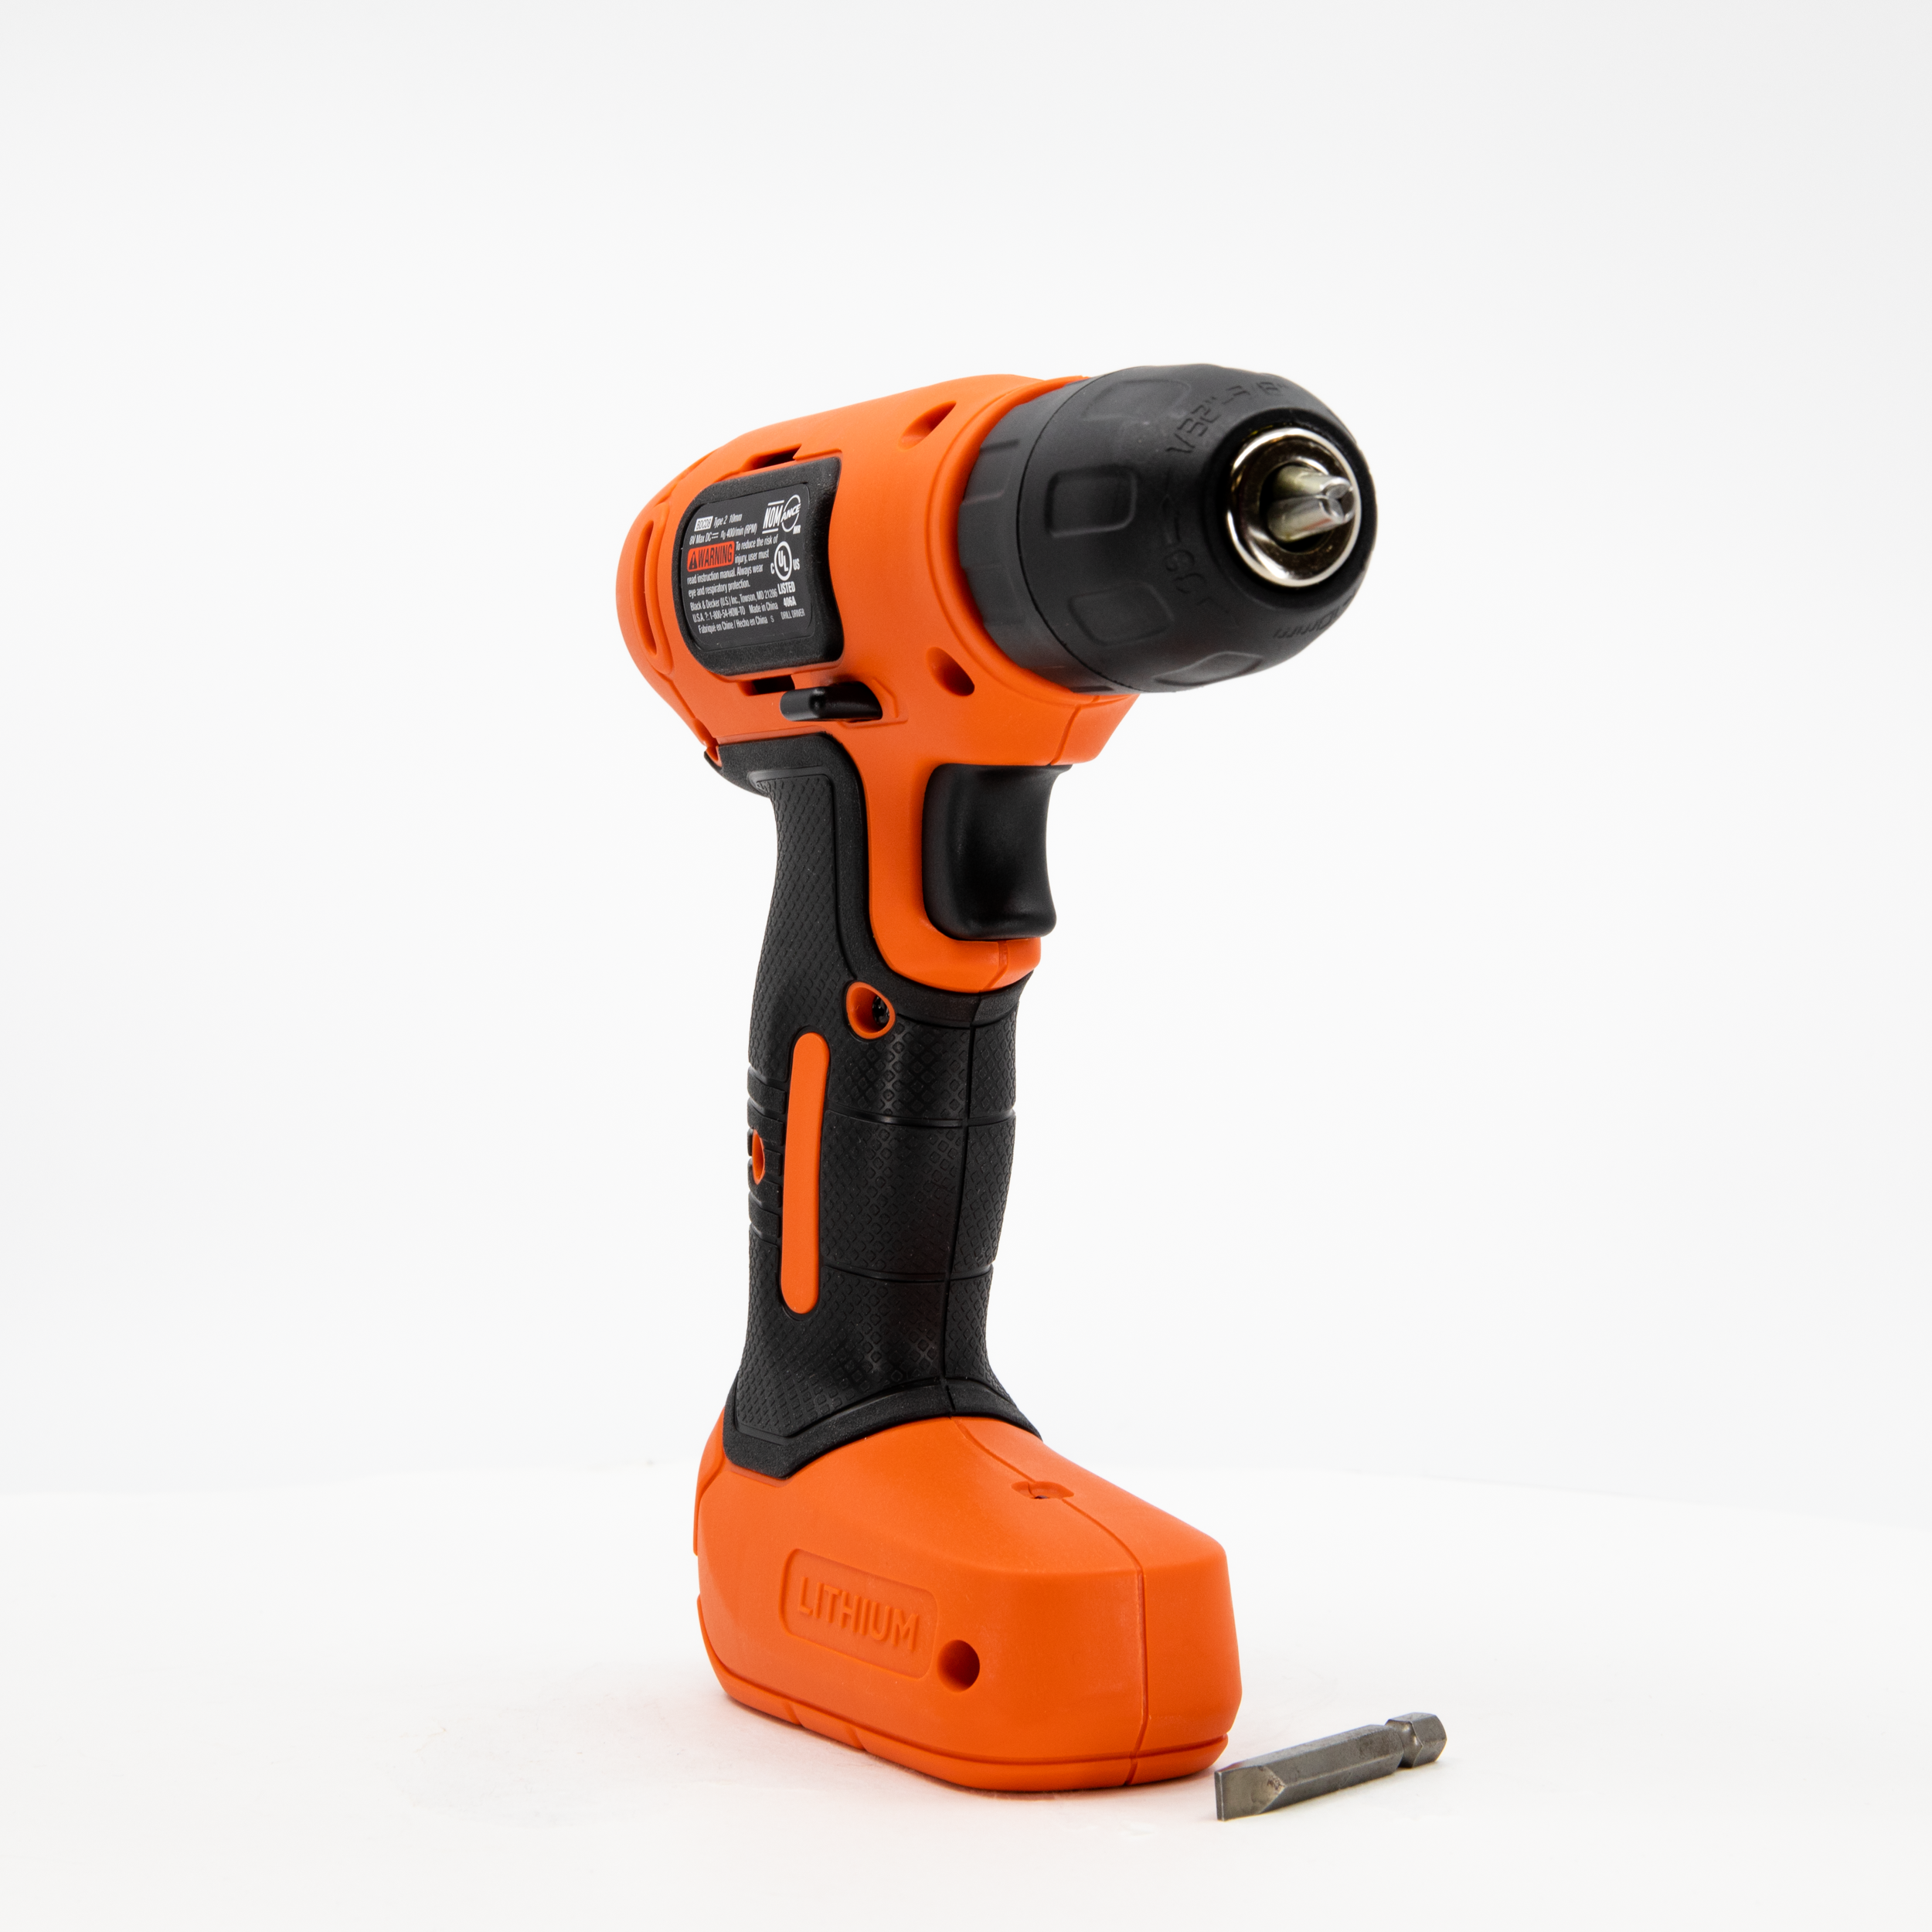 BLACK & DECKER 8V Max 8 Impact Driver (Charger Included) at